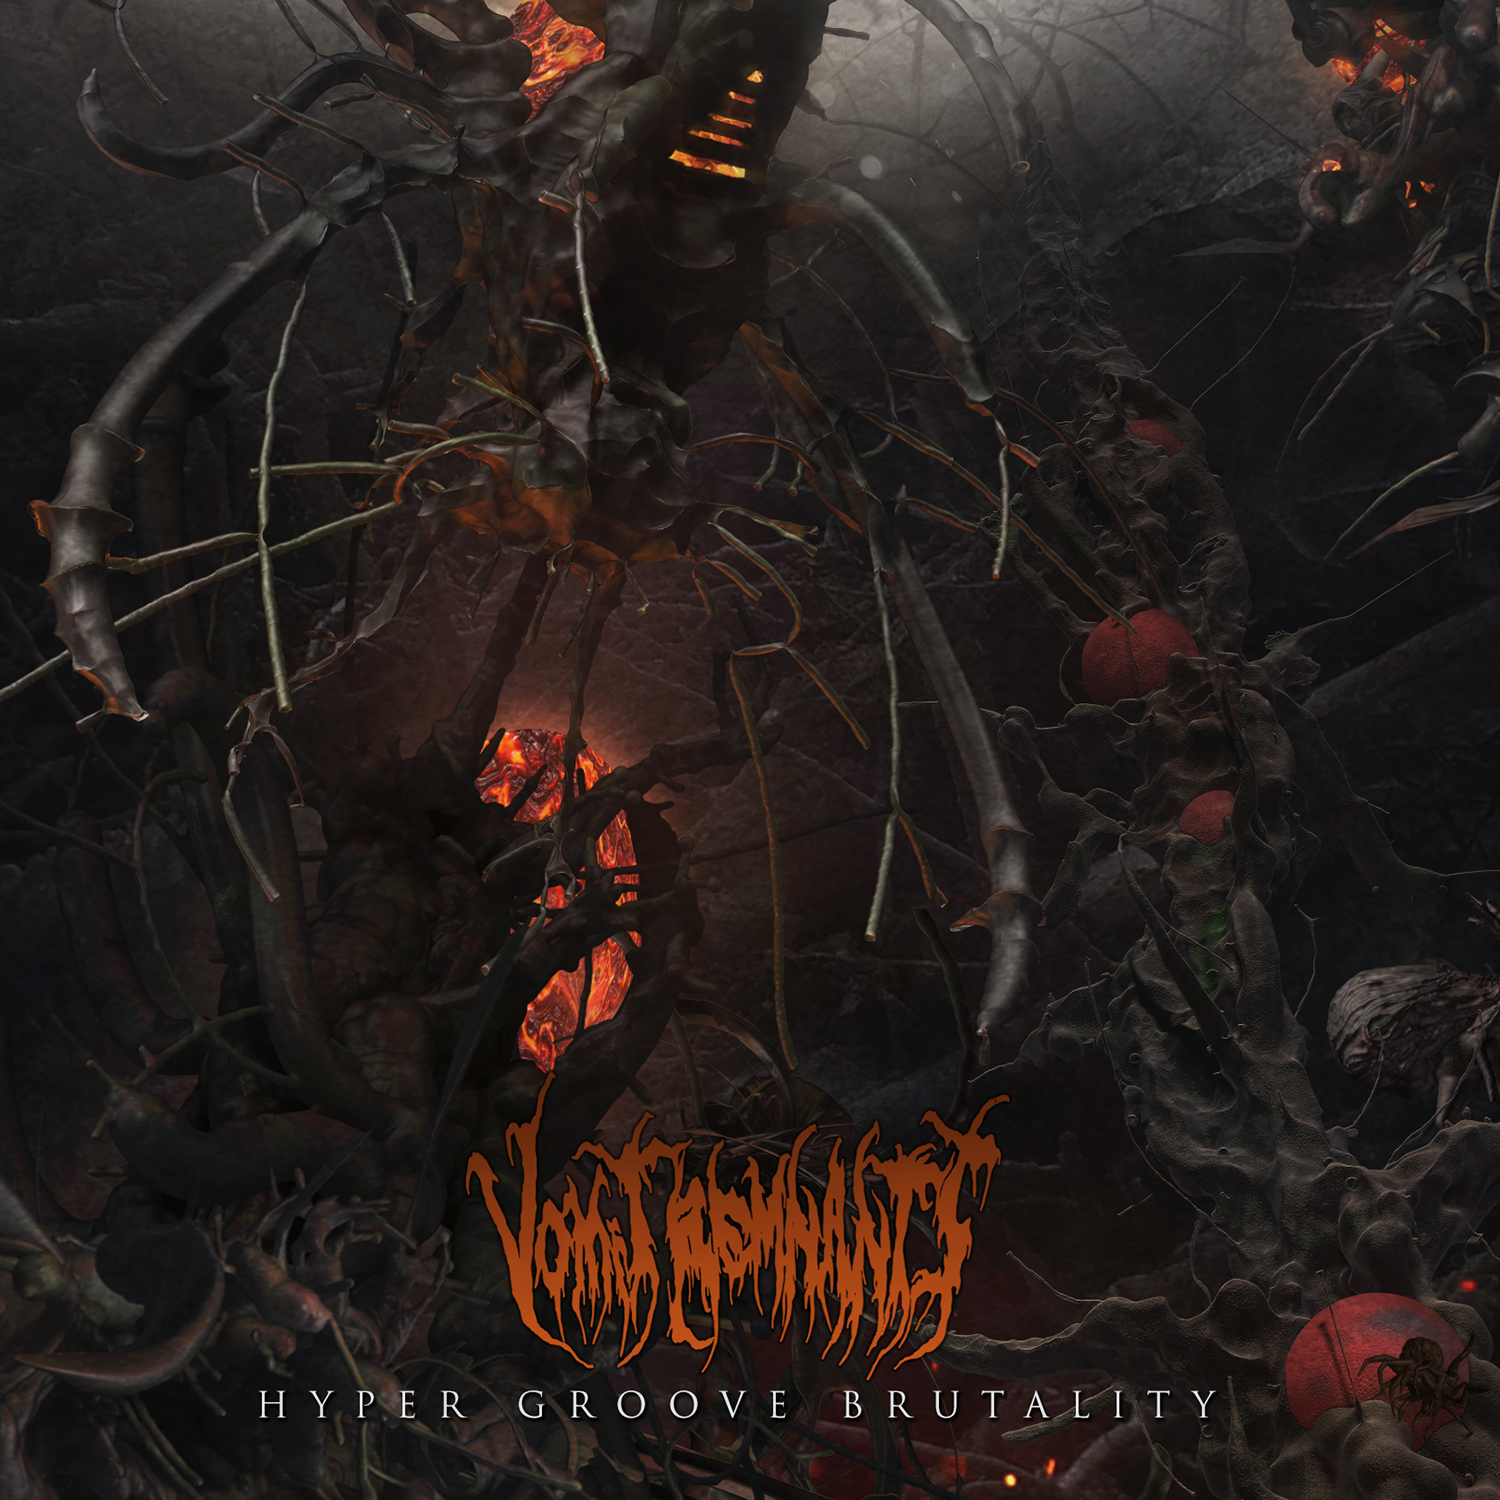 Vomit_Remnants_COVER_1500x1500